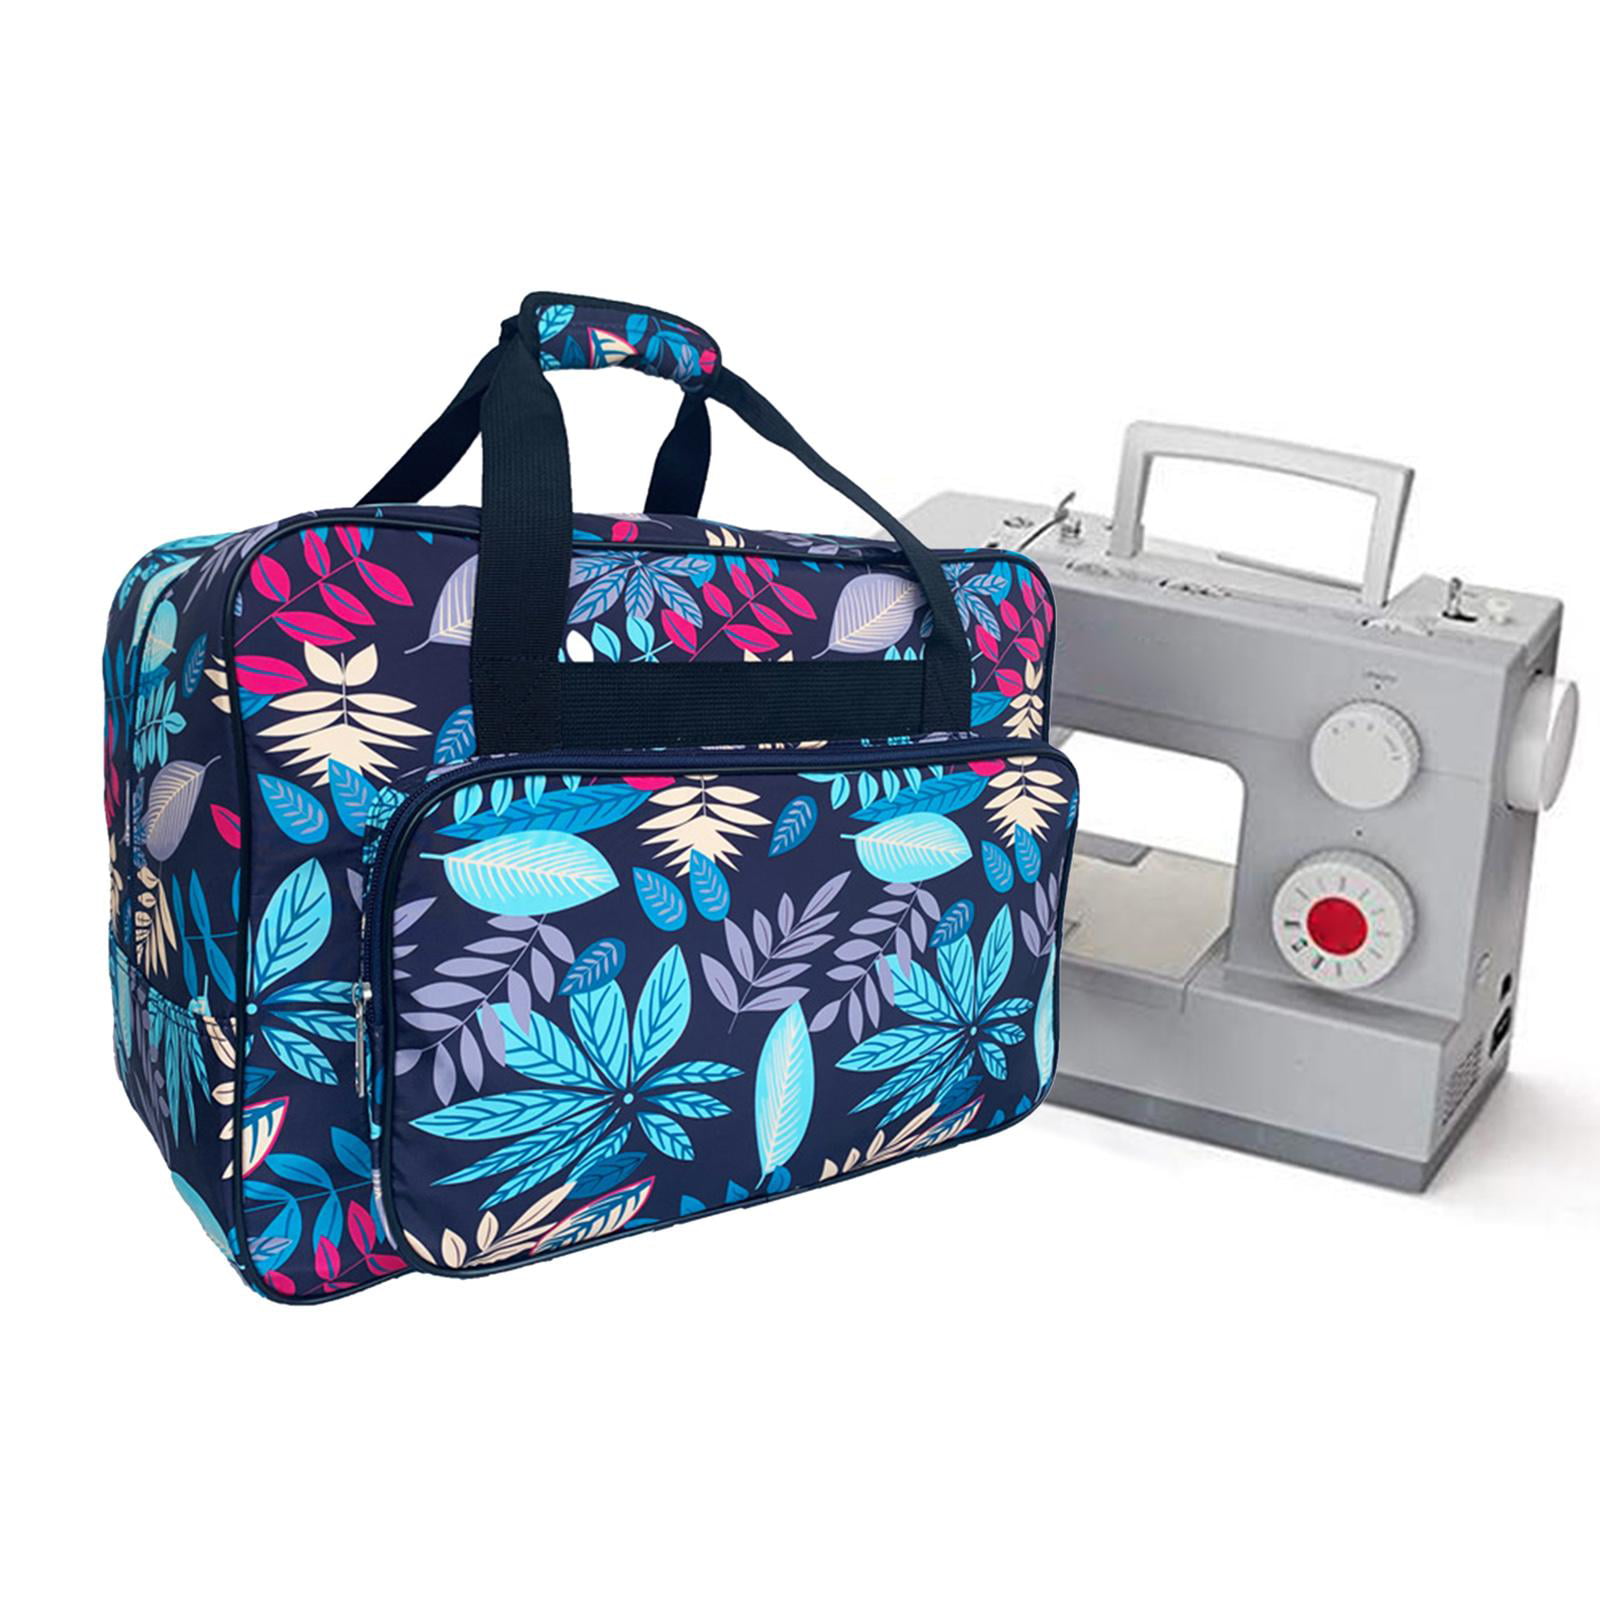 Large Capacity Sewing Machine Bag With Zipper Tote Storage Bag With Pocket  Nylon Carrying Bags For Women Men Traveling